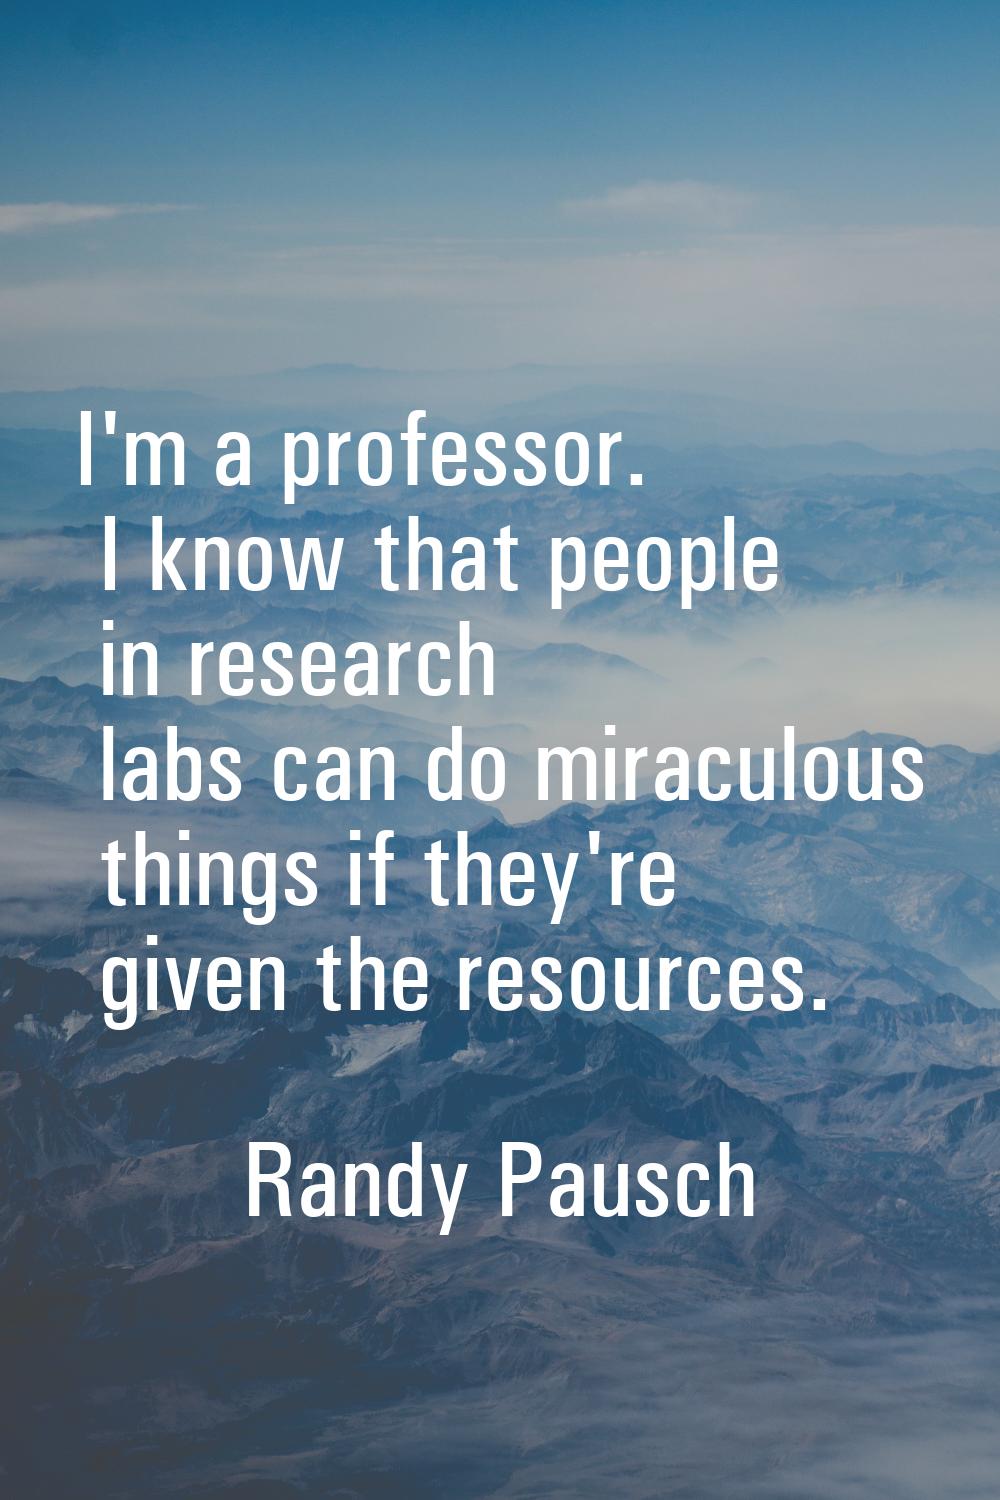 I'm a professor. I know that people in research labs can do miraculous things if they're given the 